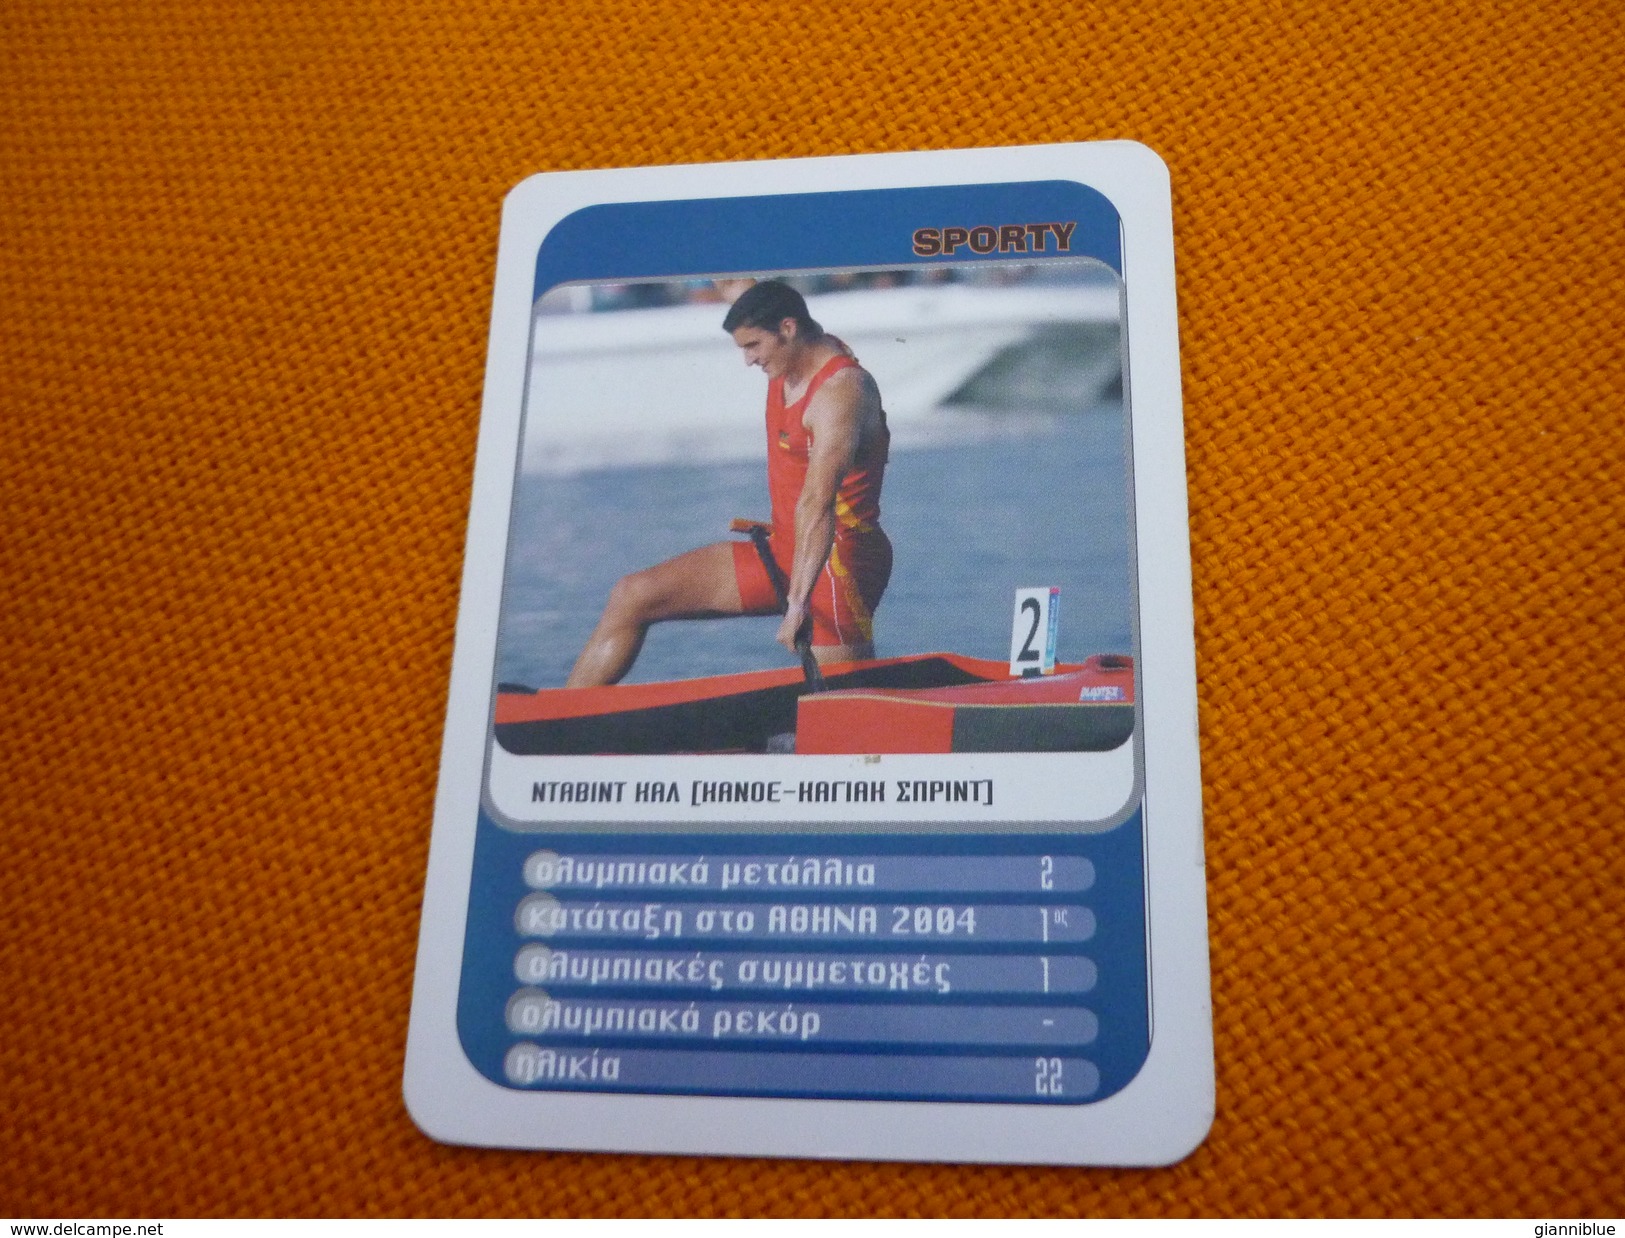 David Cal Rookie Spanish Sprint Canoeist Canoe Athens 2004 Olympic Games Medalist Greece Greek Trading Card - Trading Cards